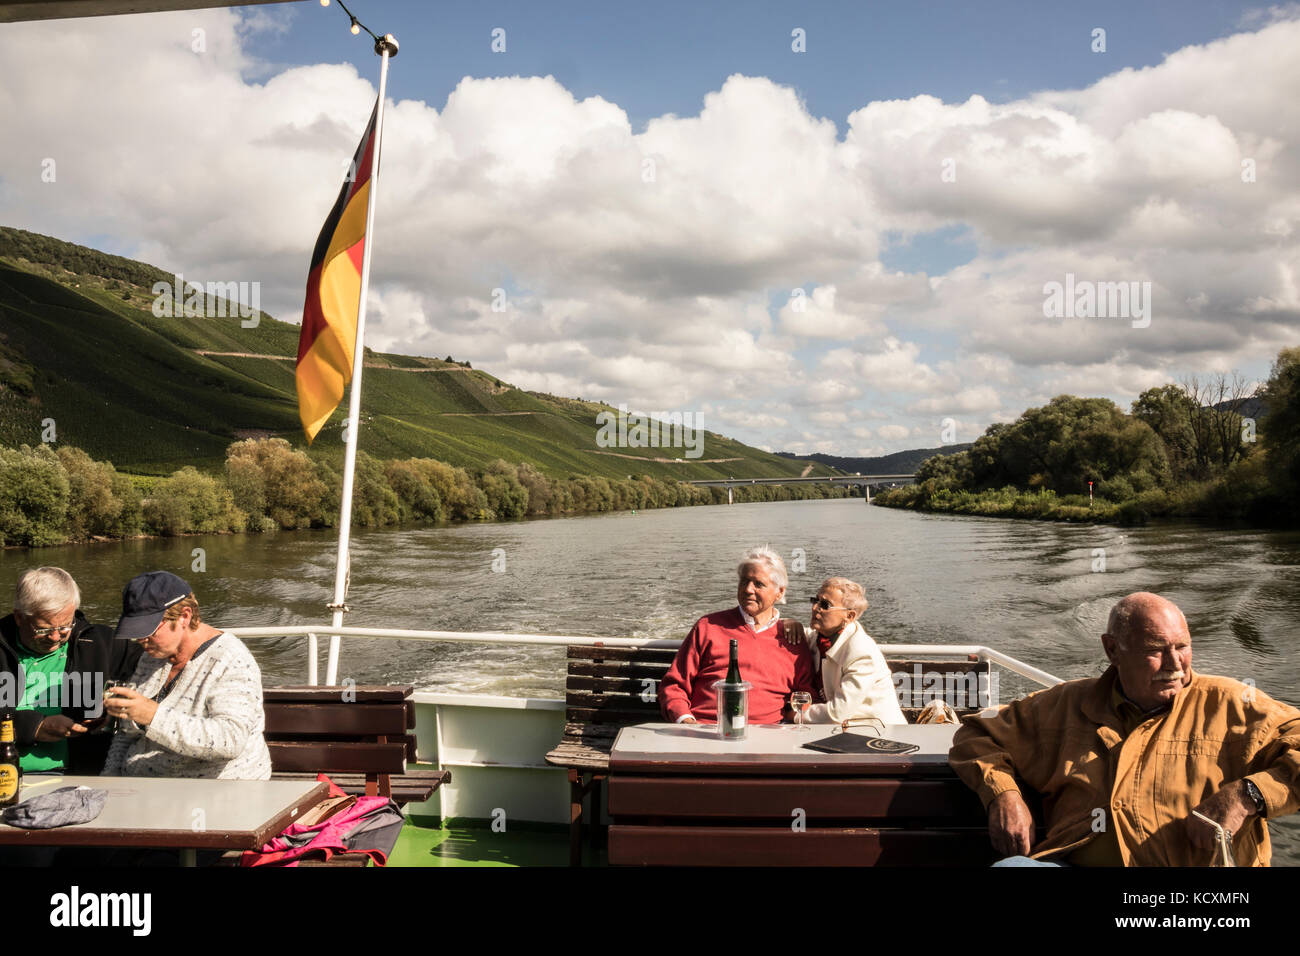 View from the pleasure trip boat Romantica on the Mosel River, Germany Stock Photo